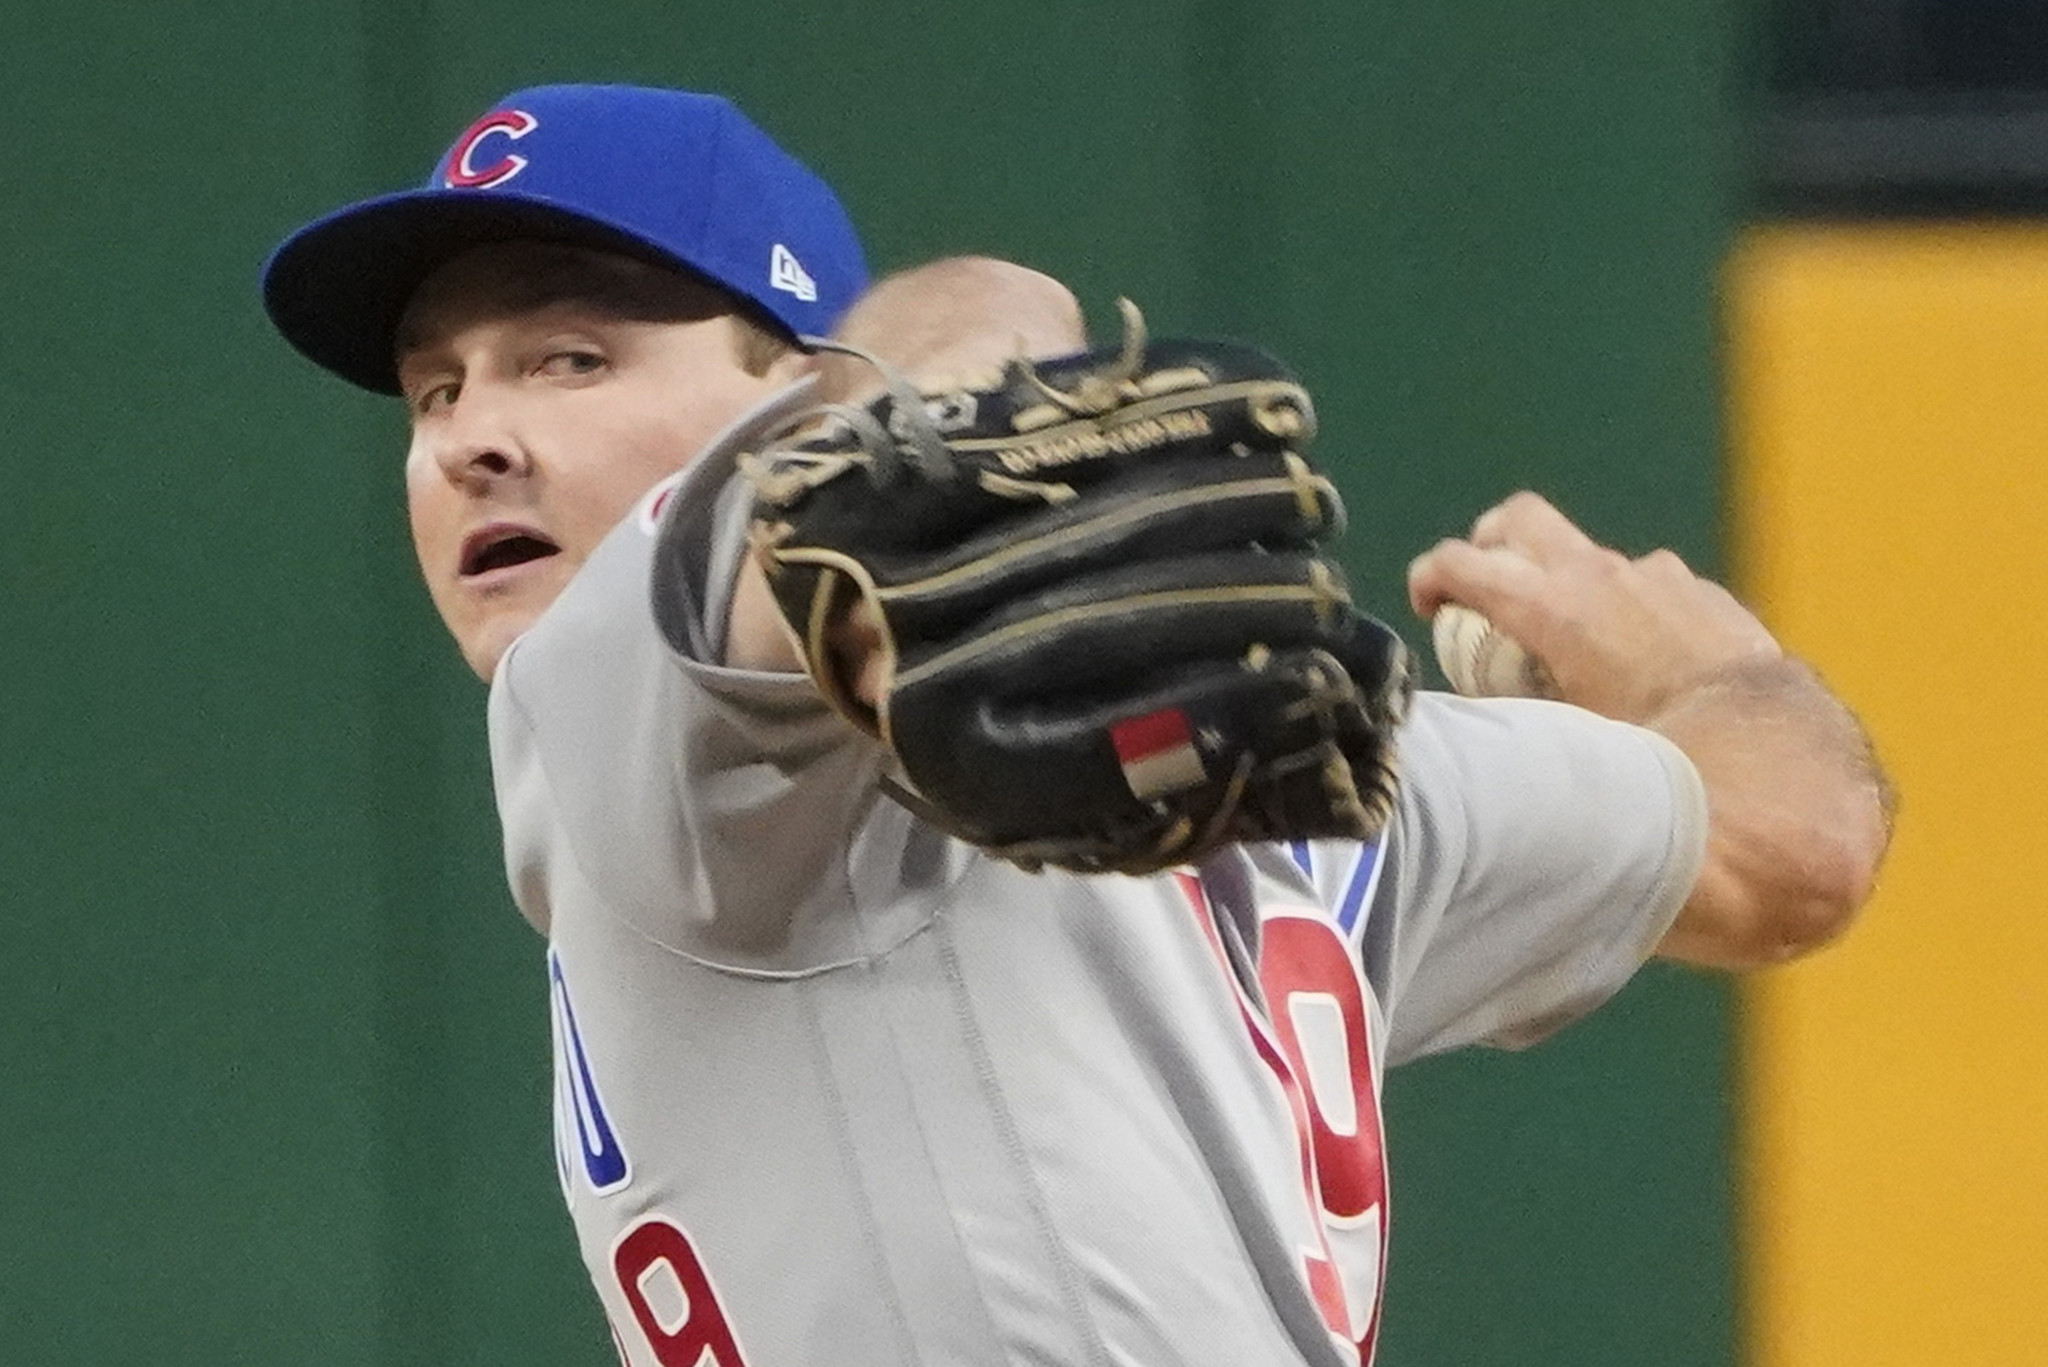 Cubs pitcher Wesneski disguised pitches too well for Statcast